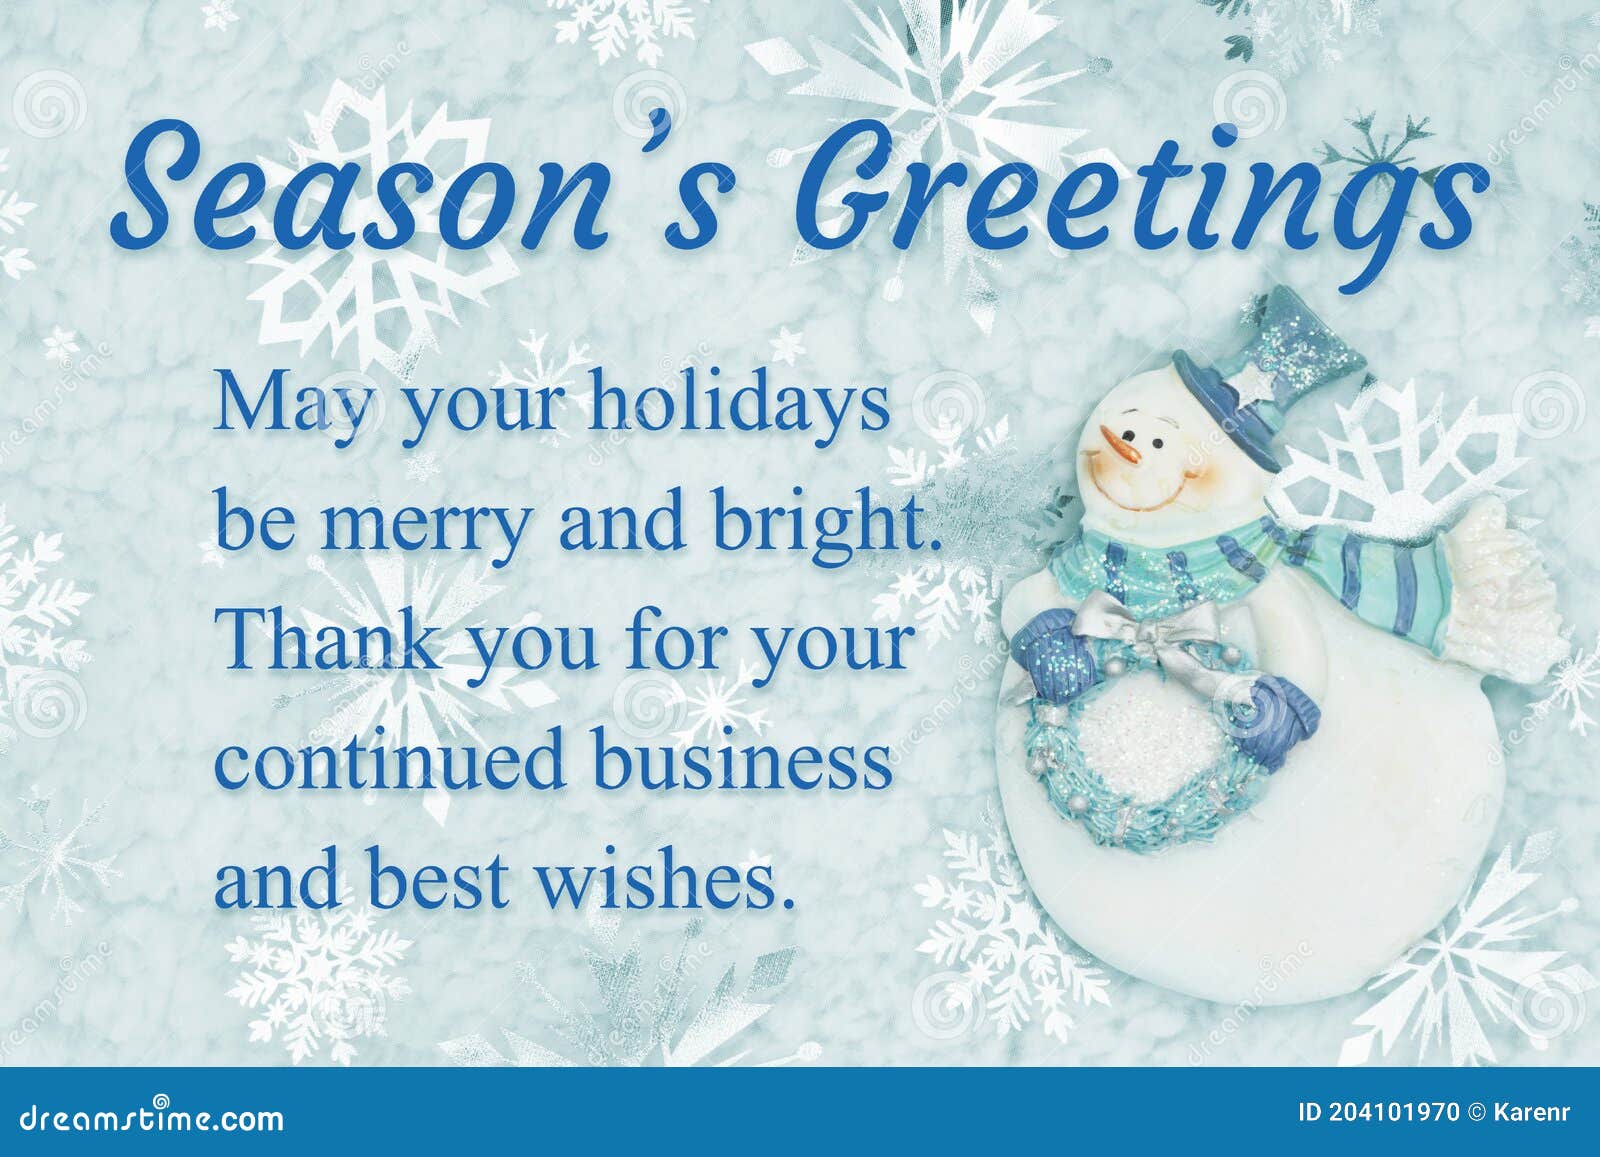 Seasonâ€™s Greetings Message for Your Customers with a Friendly ...